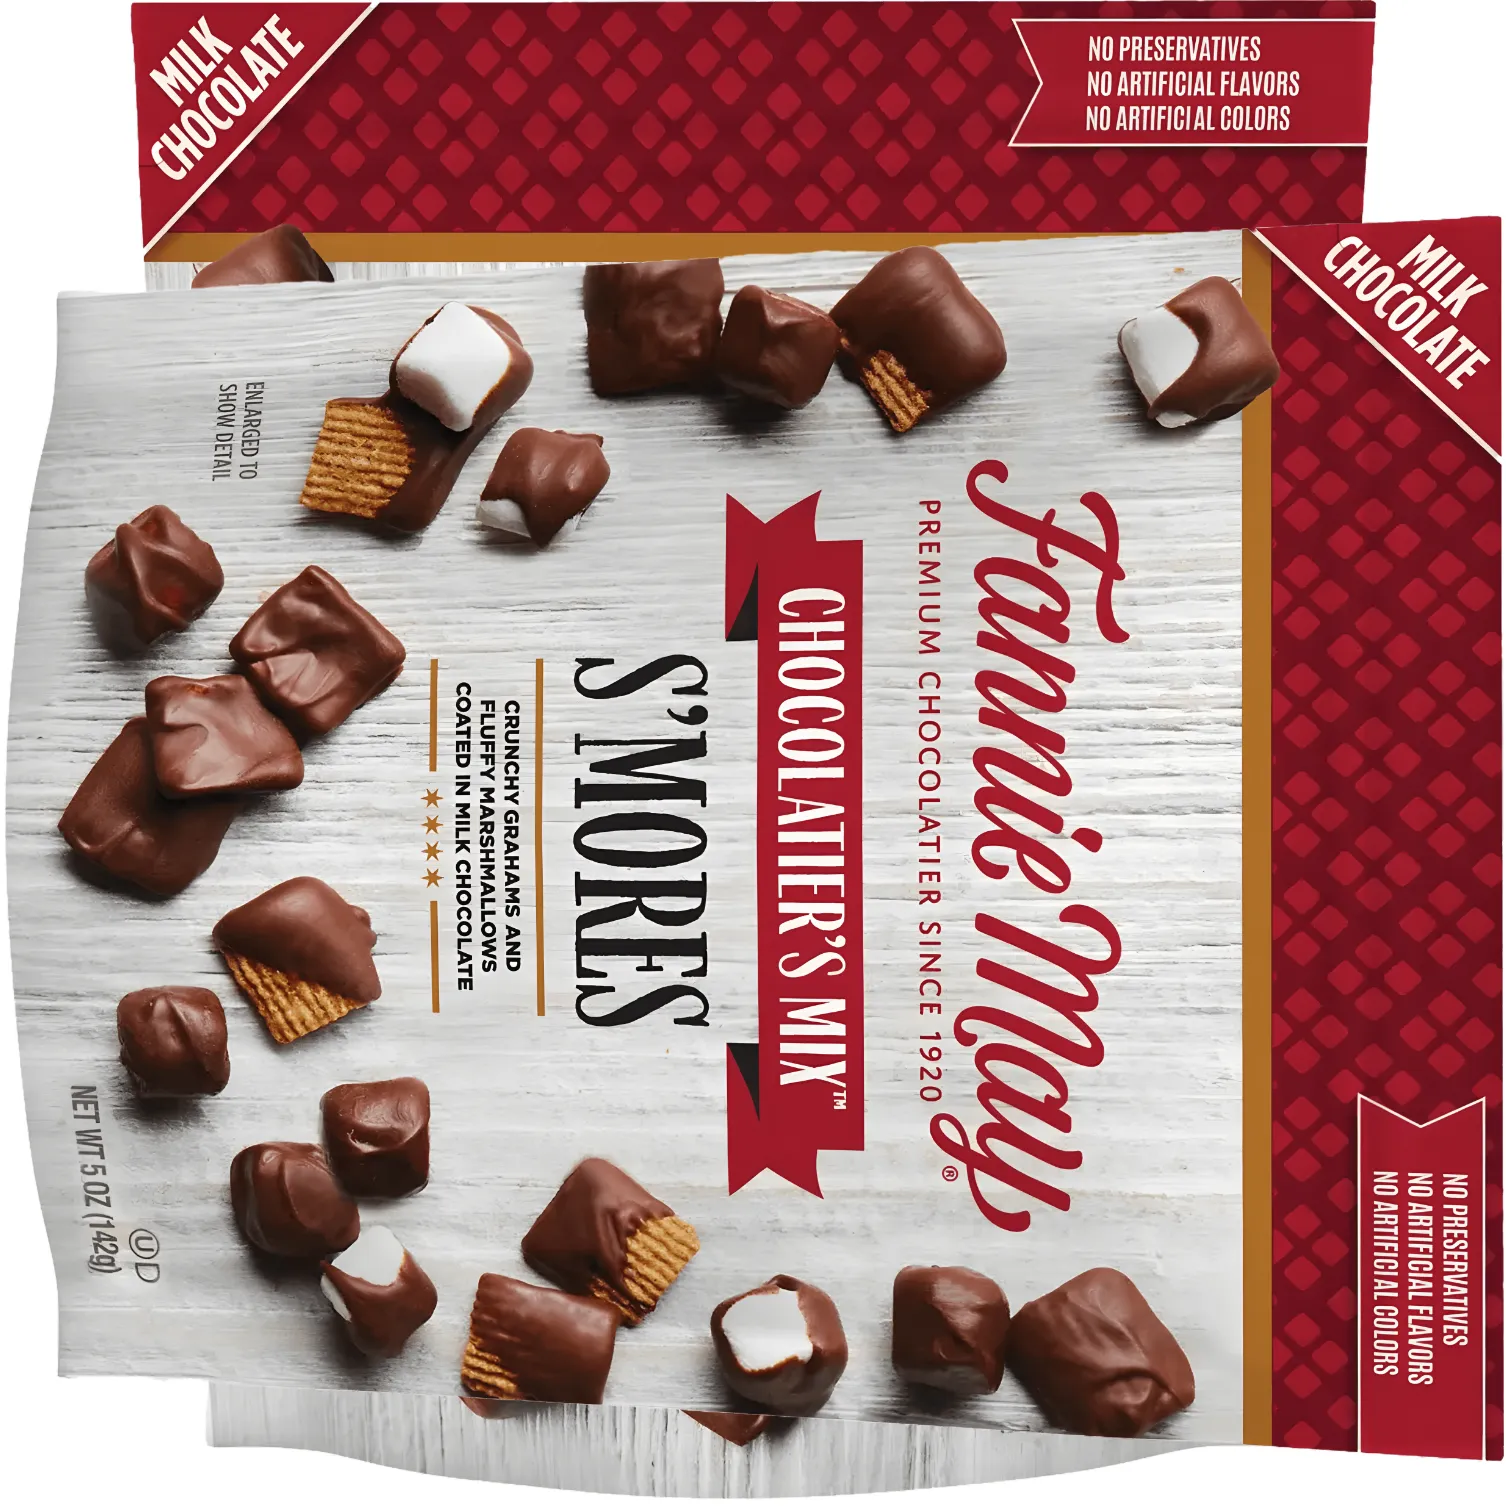 Free Fannie May S'Mores Mix At Freeosk